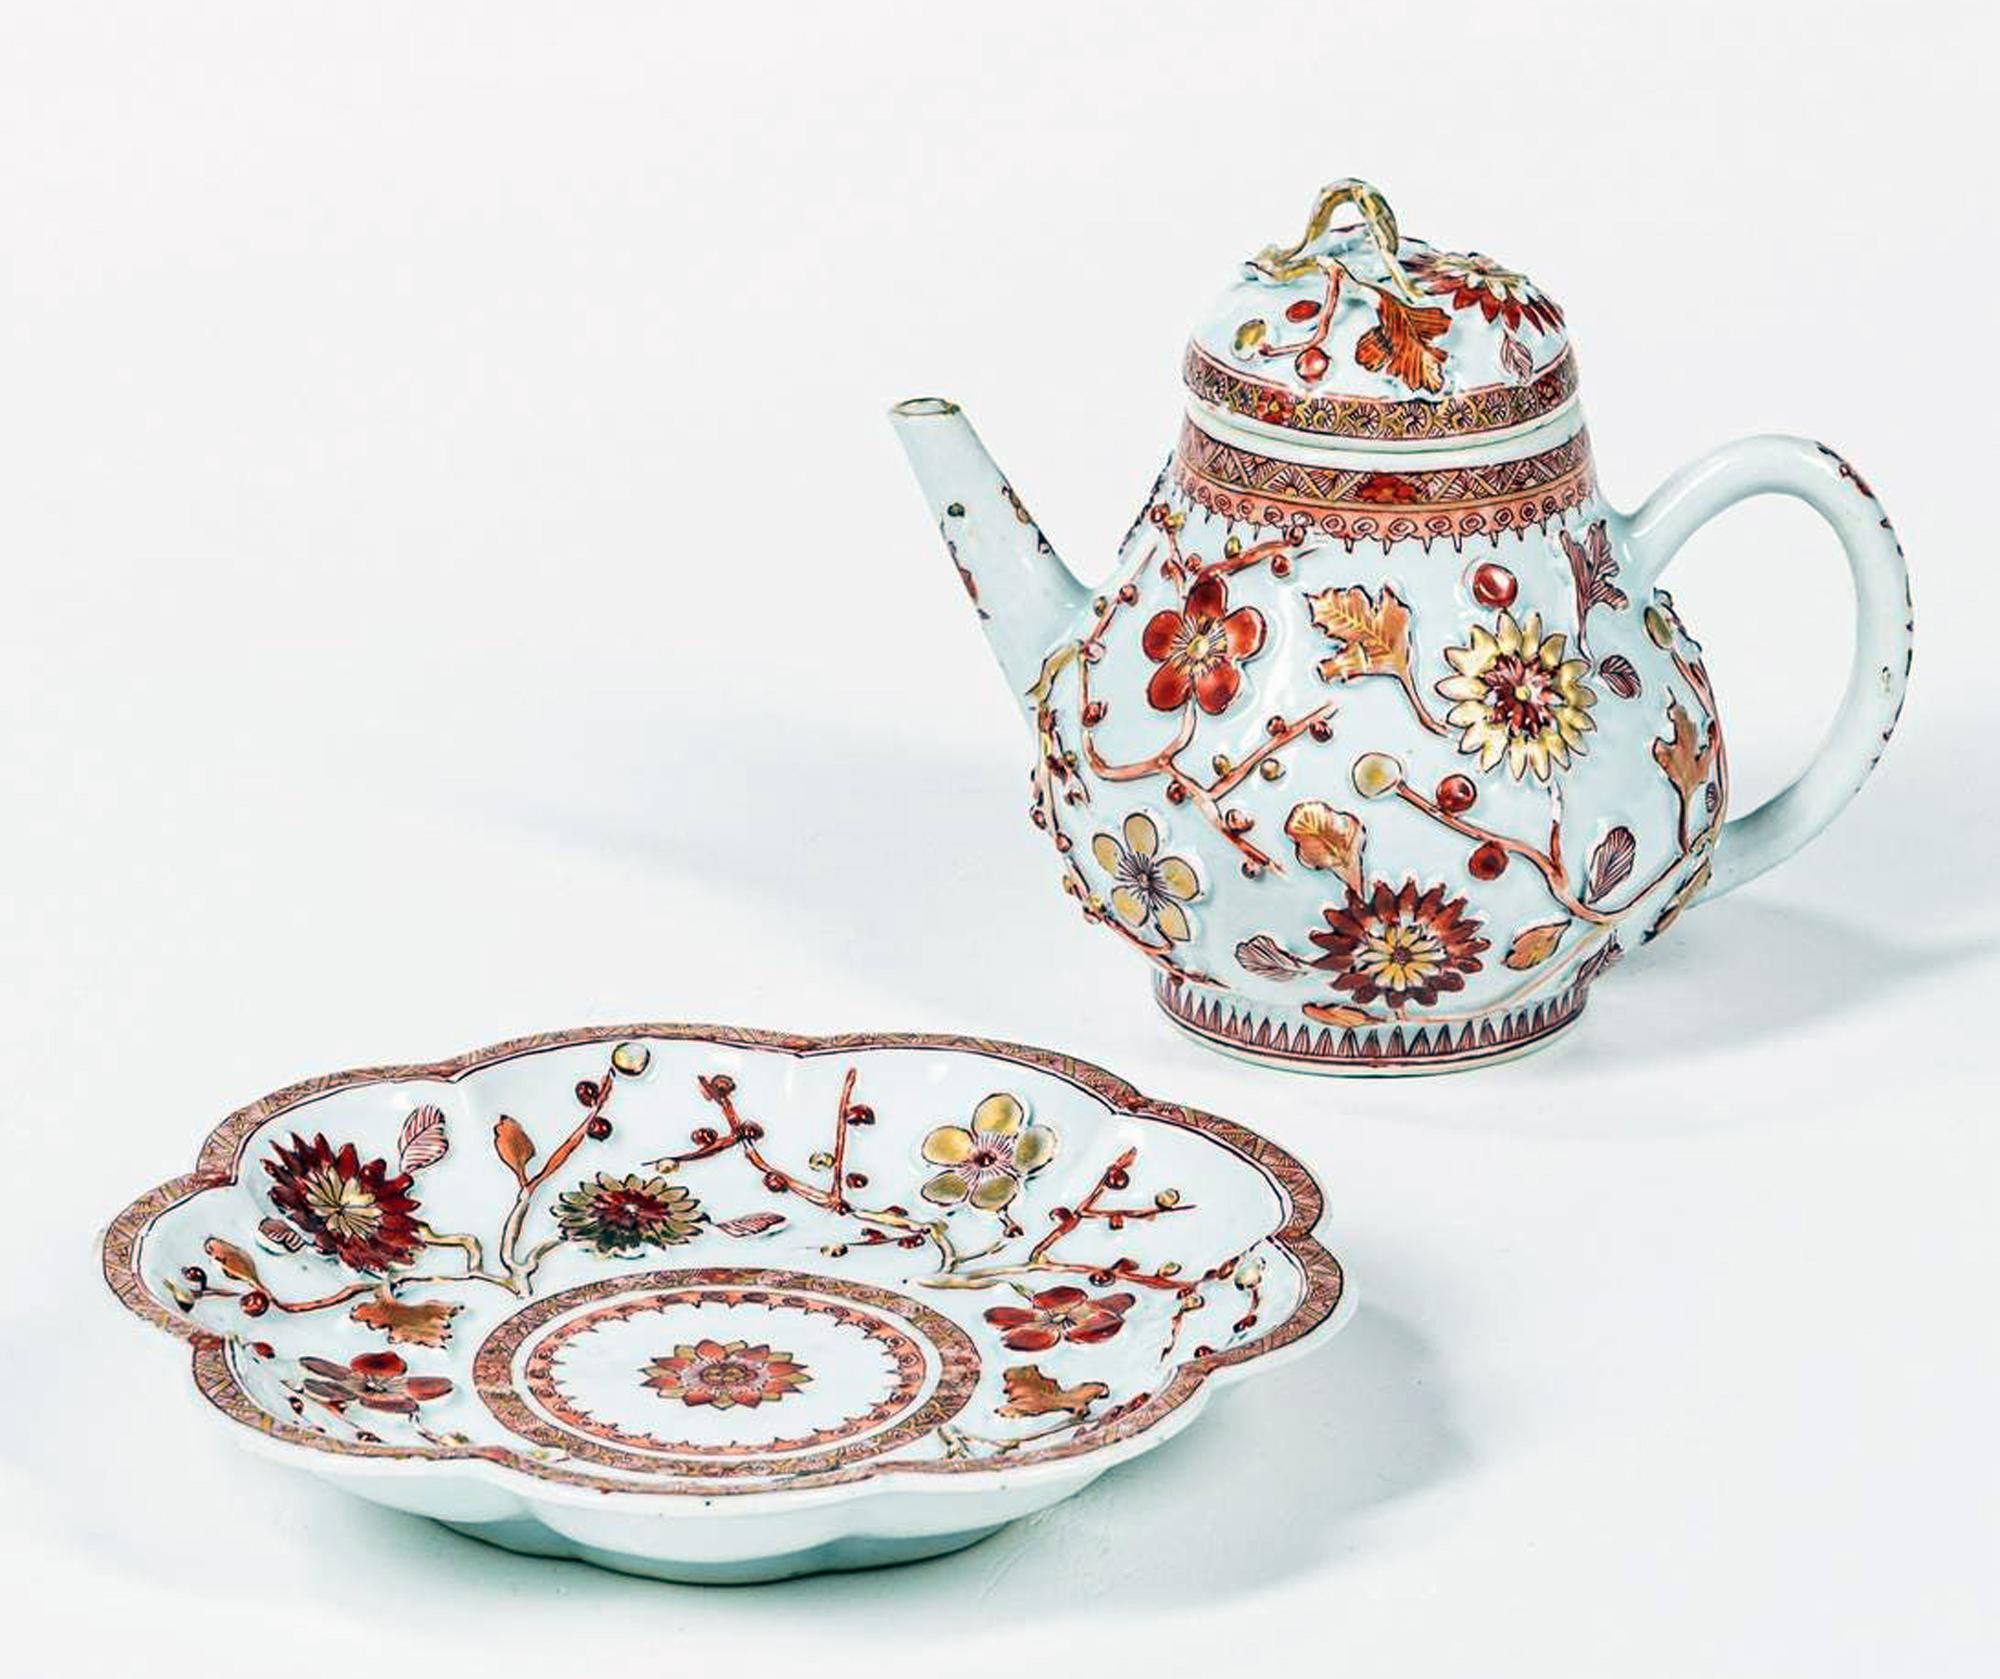 Chinese Export early 18th century Rouge de Fer porcelain teapot, cover & stand,
Kangxi,

The pear-shaped Chinese Export porcelain teapot with molded raised flower heads and stems in a rouge de fer & gilt with its circular stand. The raised